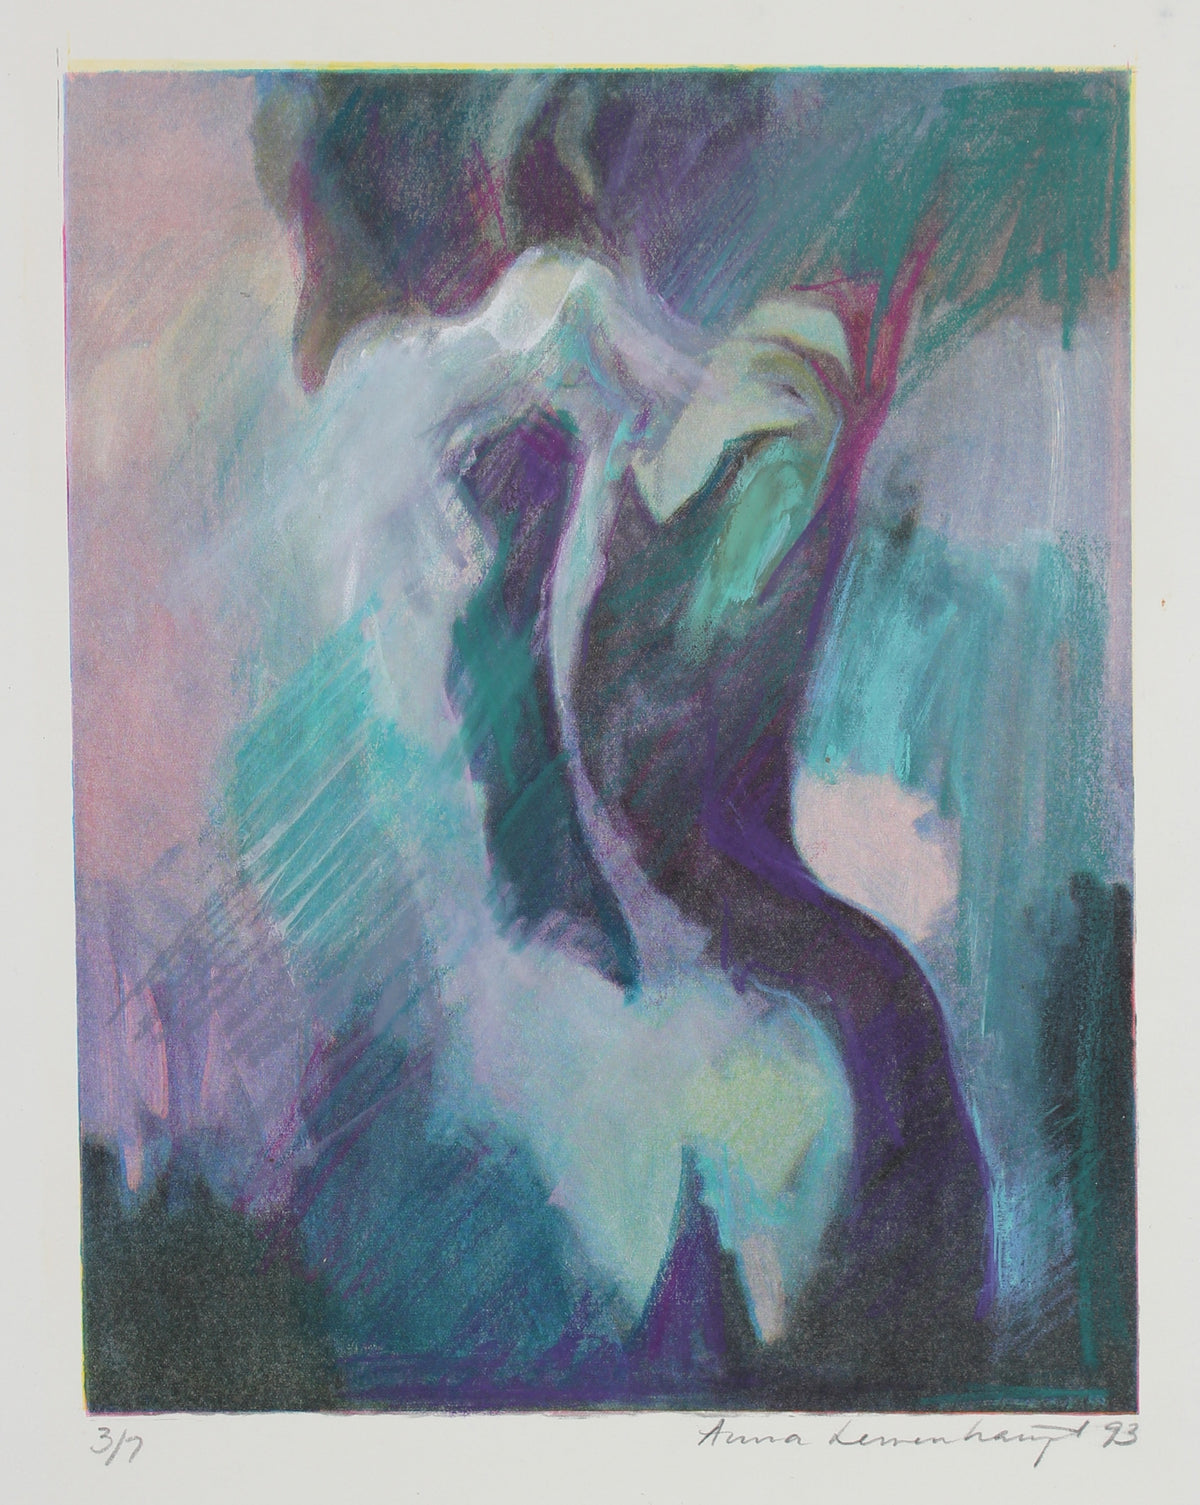 Abstracted Figure From Behin&lt;br&gt;1993 Mixed Media Print&lt;br&gt;&lt;br&gt;#99147